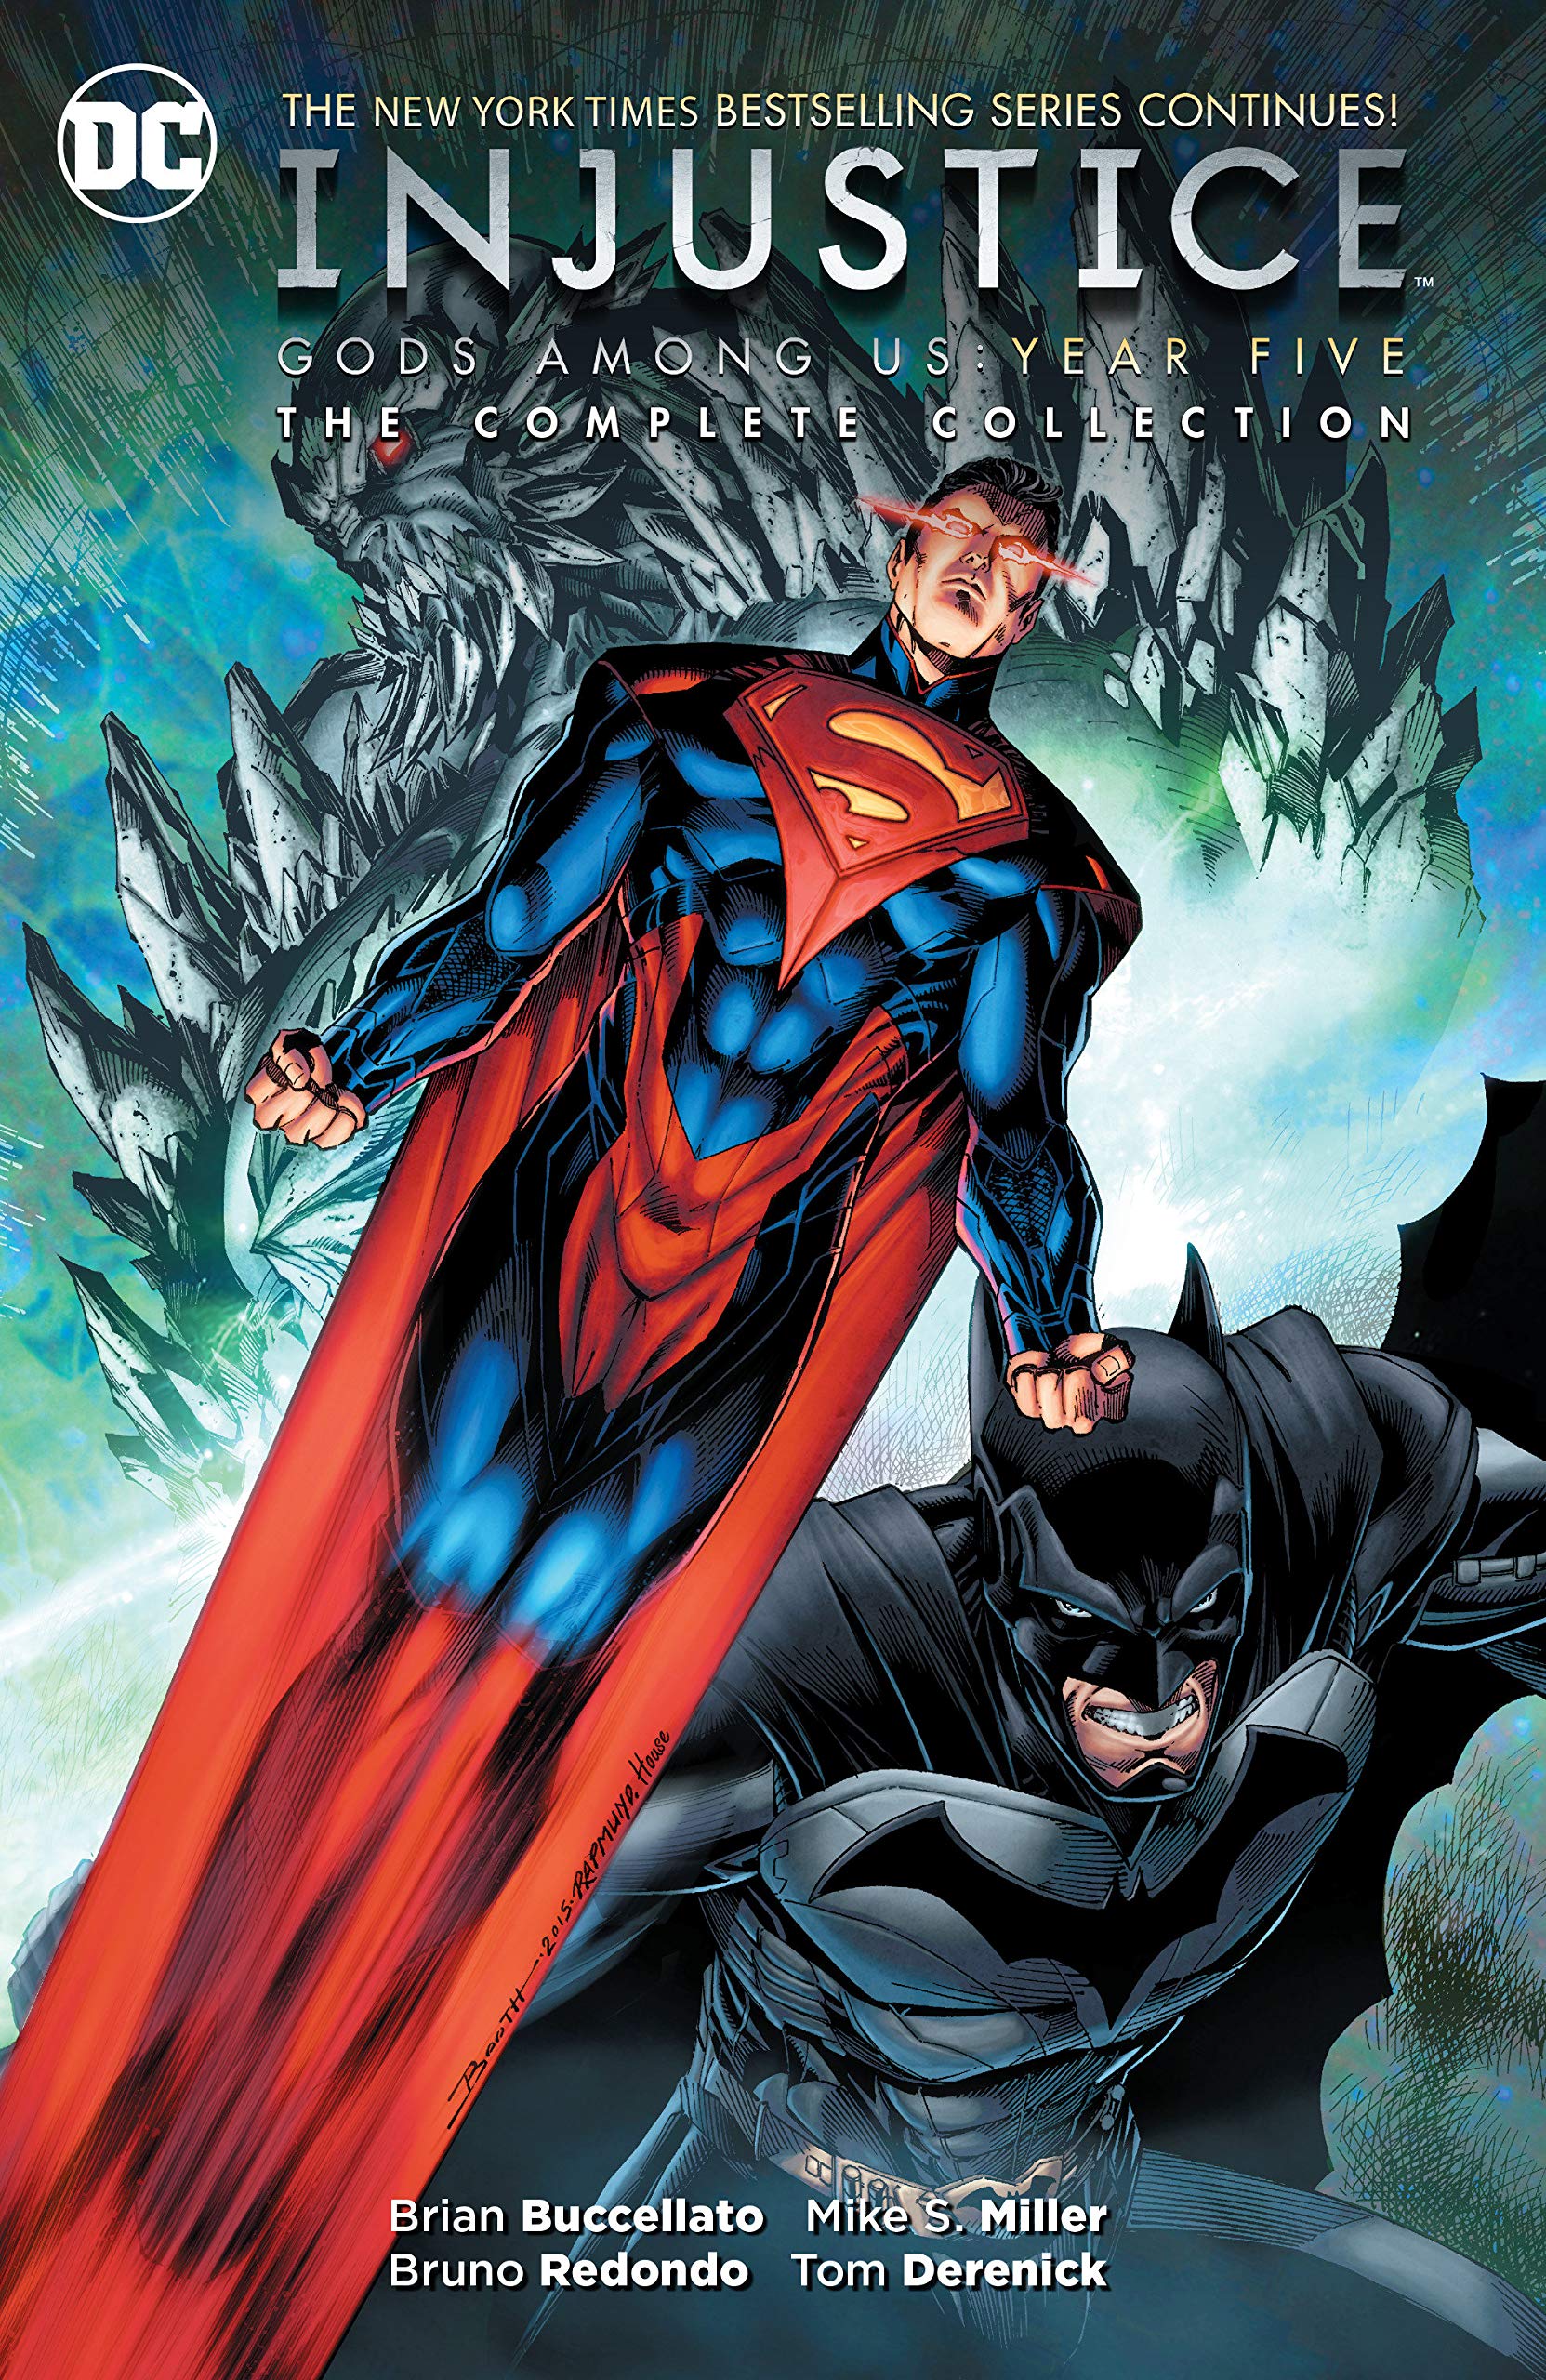 Comic completo Injustice: Gods Among Us Year Five